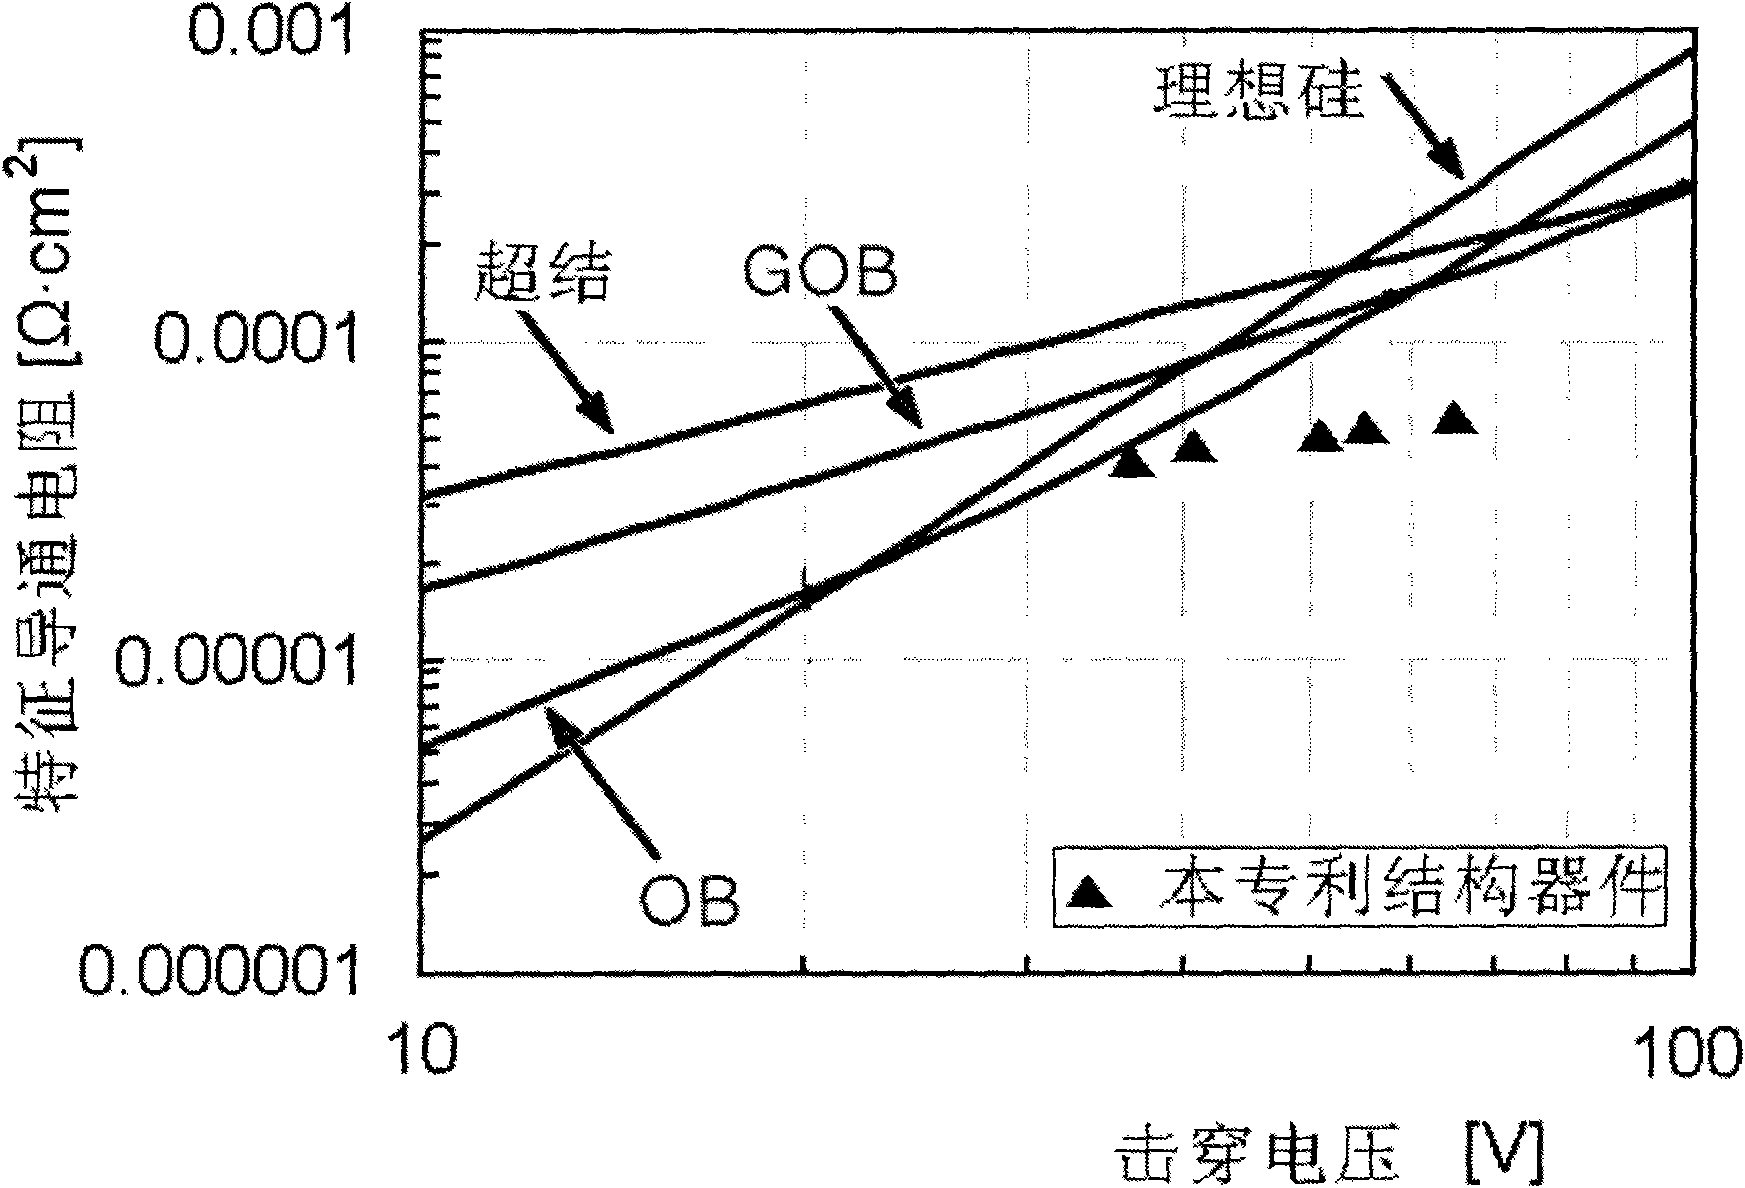 UMOS transistor capable of modulating on resistance